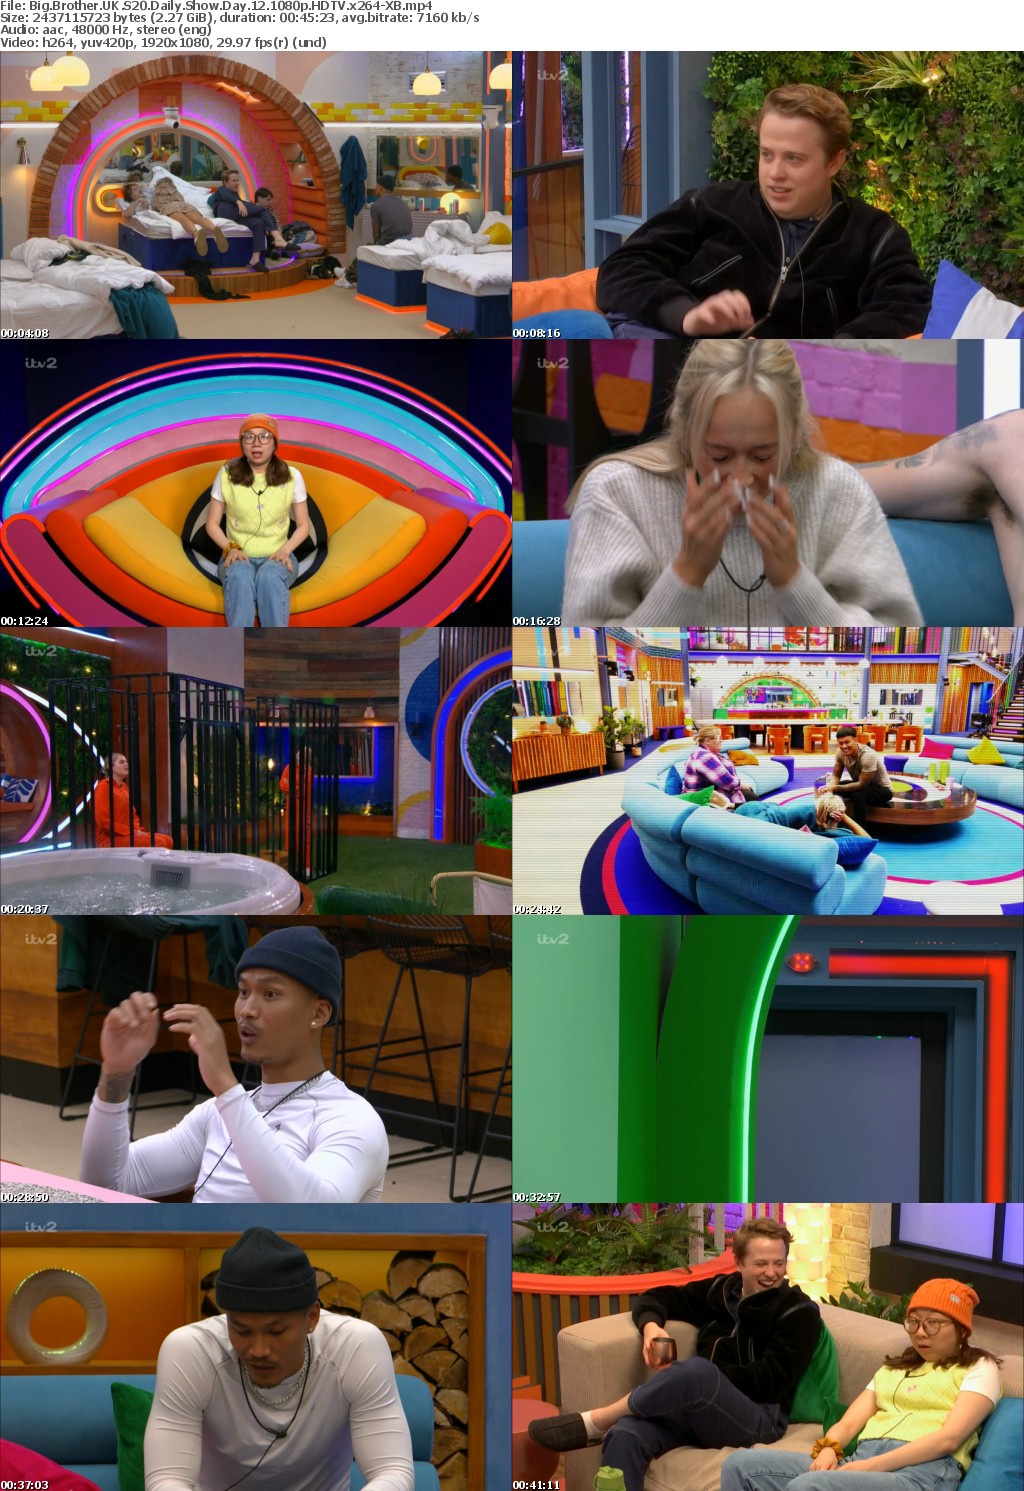 Big Brother UK S20 Daily Show Day 12 1080p HDTV x264-XB